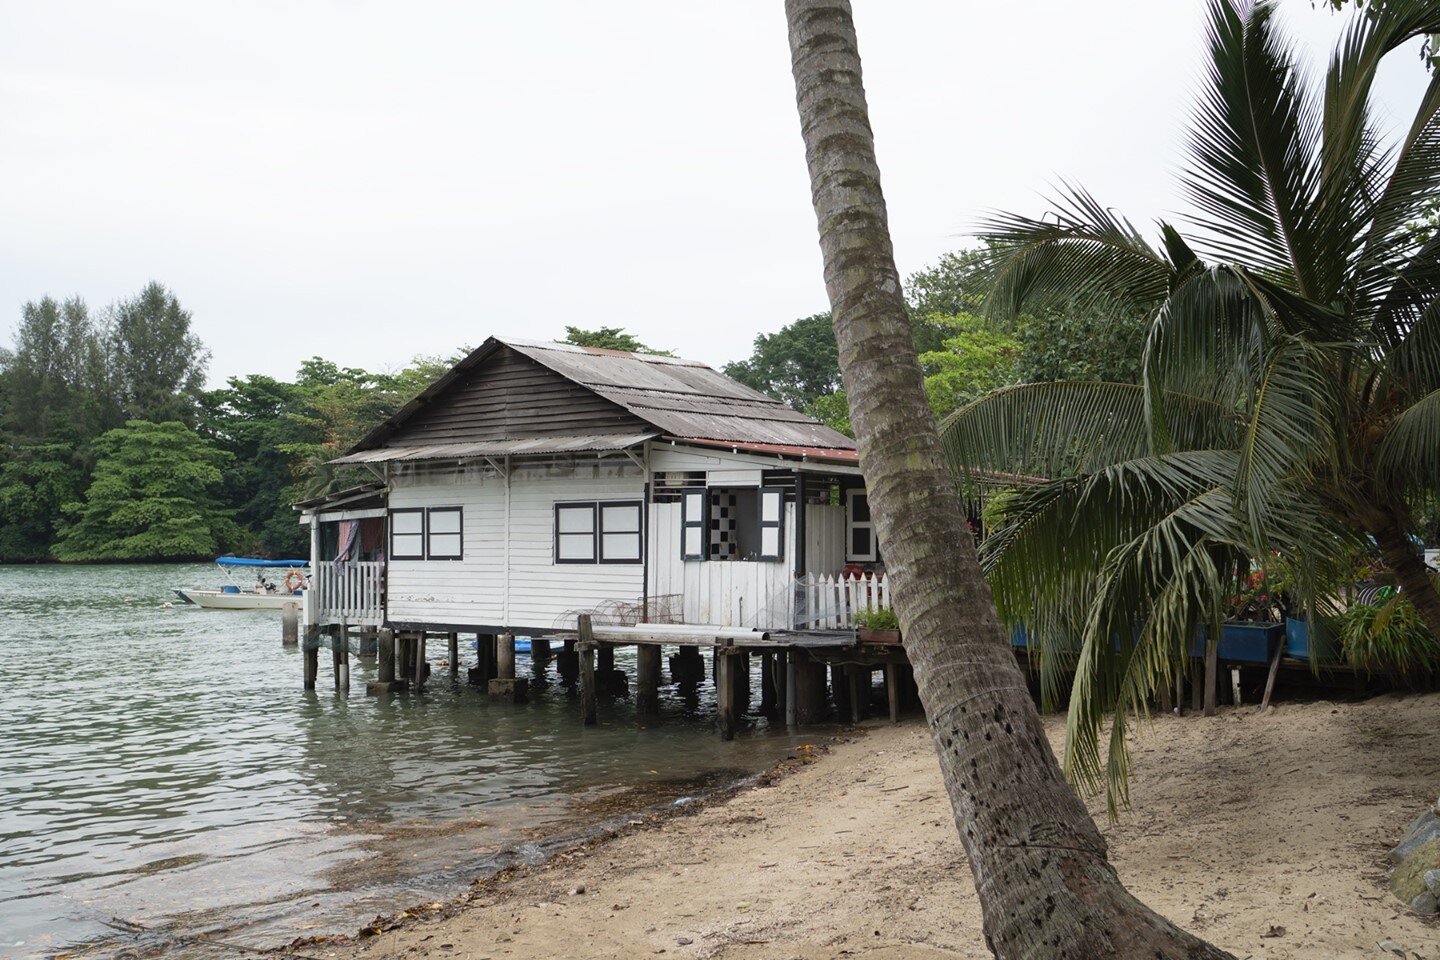 Our visit to Pulau Ubin revealed an exciting glimpse into a primeval Singapore.